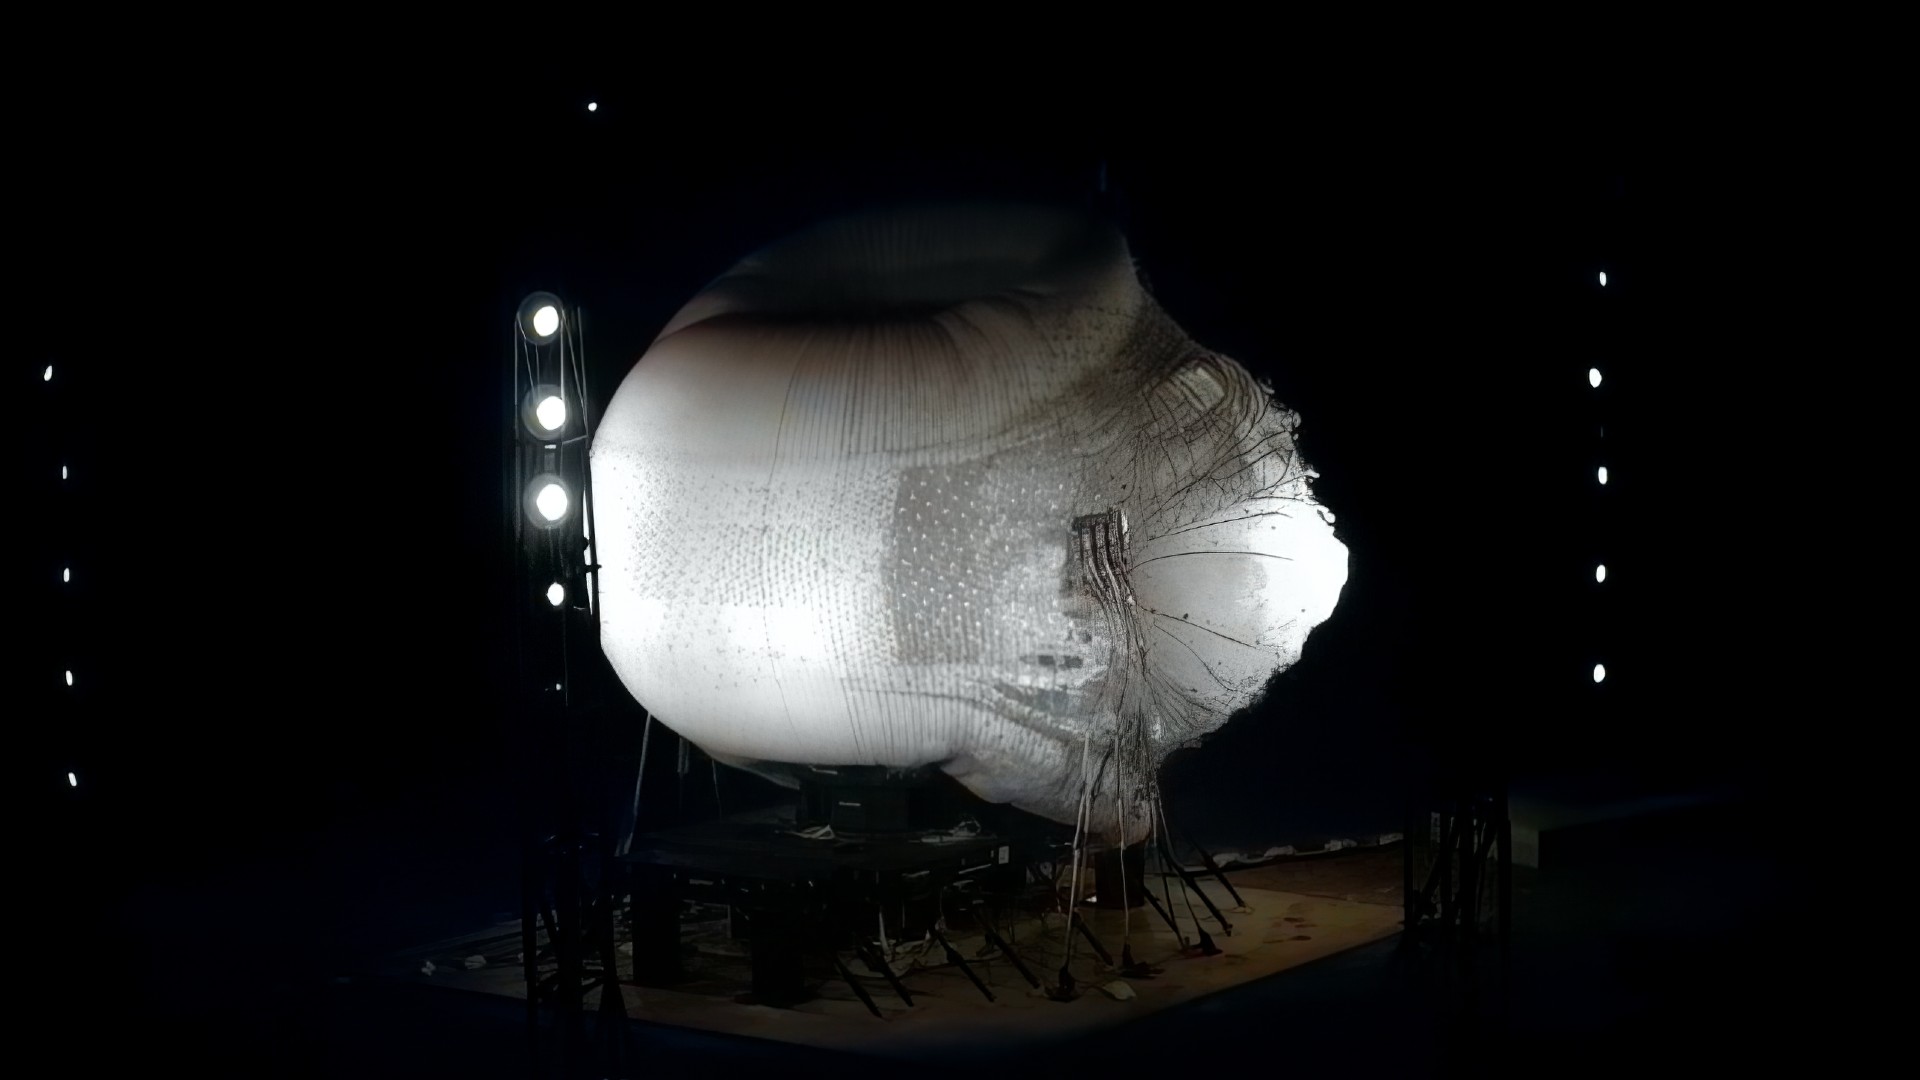  Sierra Space won't stop blowing up inflatable space station modules (video) 